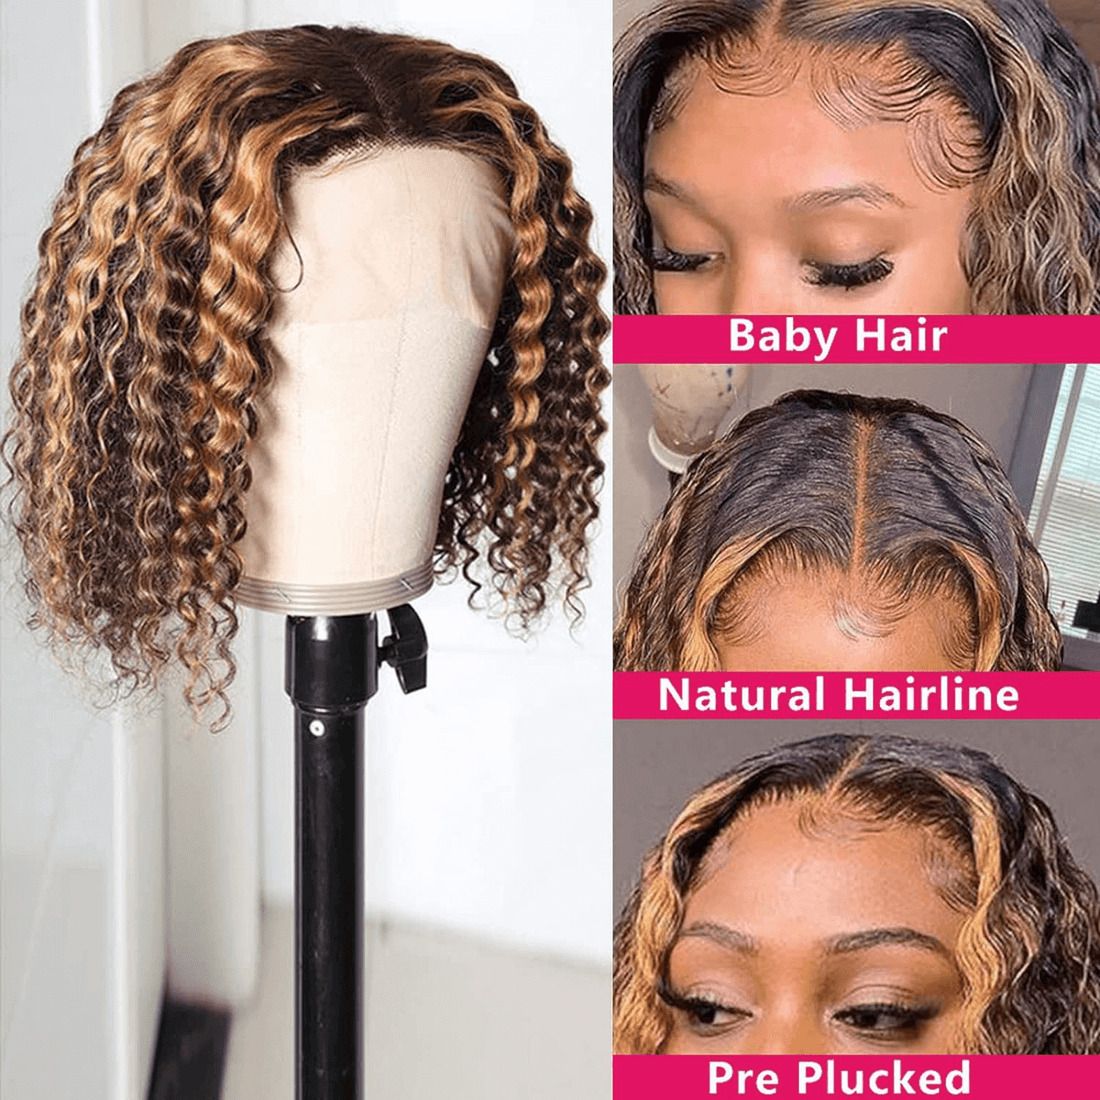 Wesface Highlight Bob Wig Honey Blonde 13x4 Transparent Lace Front Wig Human Hair Short Curly Bob Wigs Pre Plucked With Baby Hair Deep Wave Lace Front Wig 180% Density Super Soft P4/27 Color